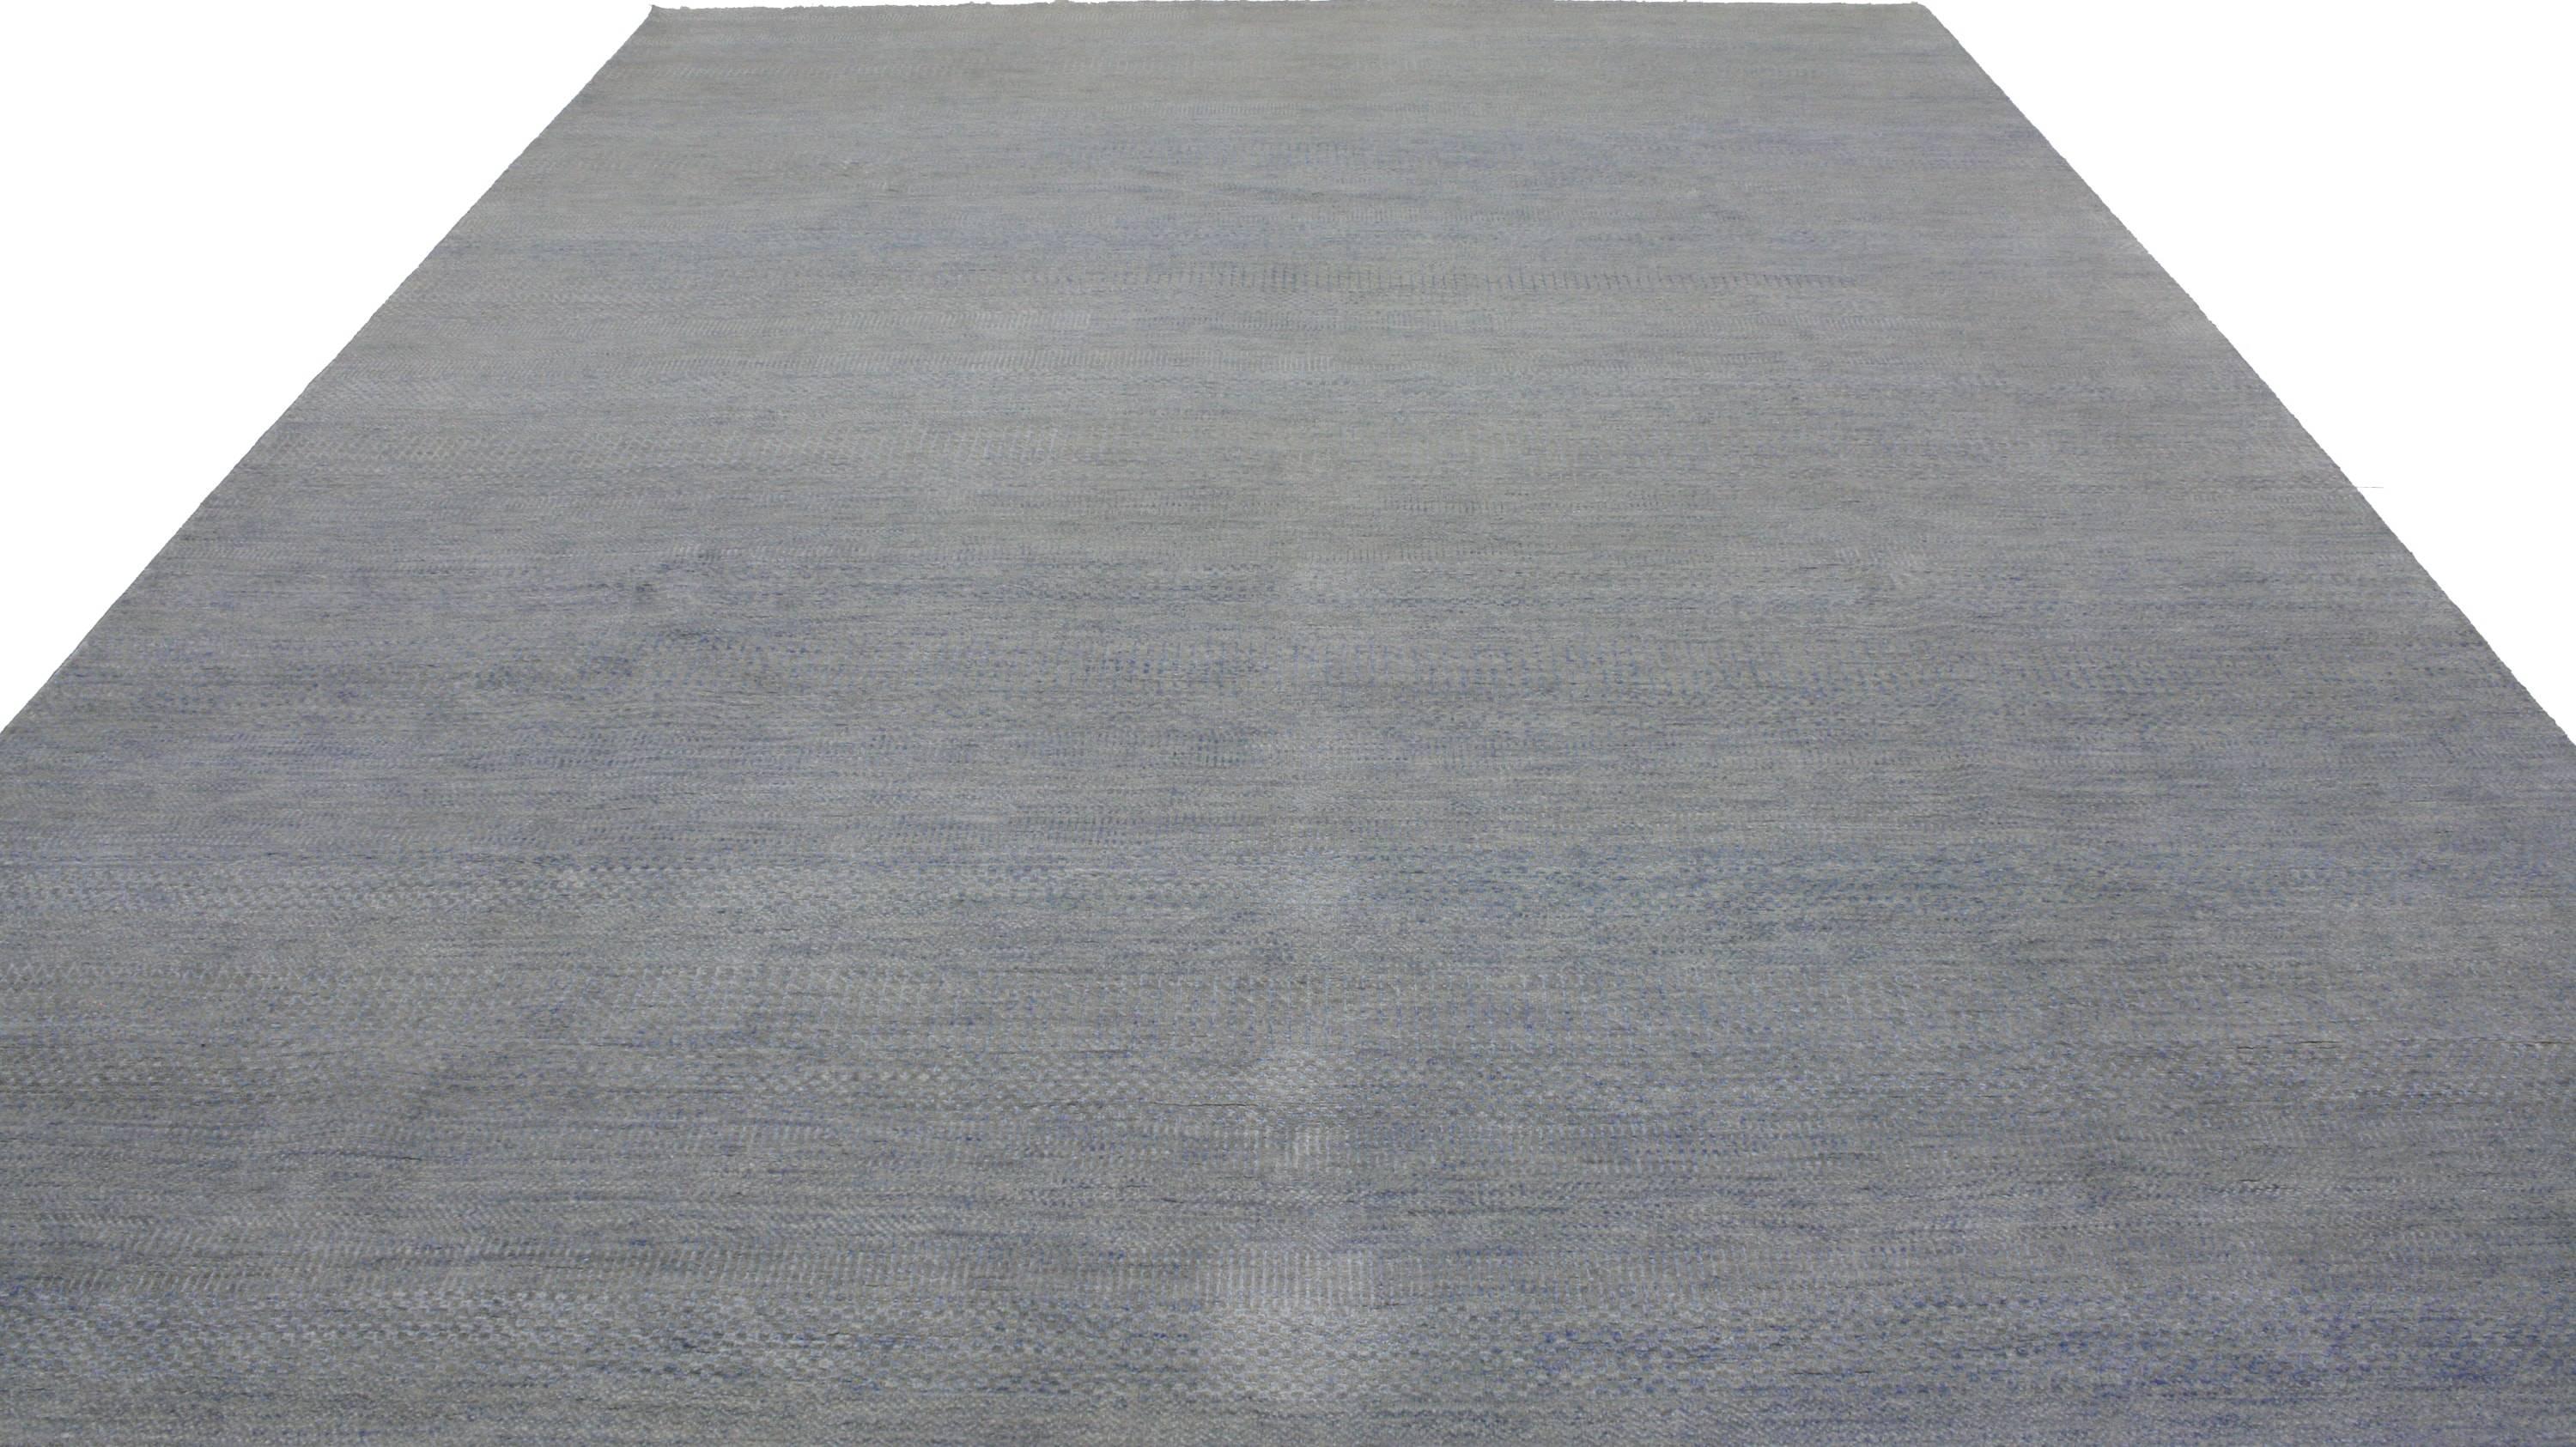 30147 New Modern Transitional Gray-Blue Area Rug with Minimalist Contemporary Style. Striking in its style and delicate beauty, this transitional gray area rug features a subtle geometric pattern with contemporary minimalist style. The cool and